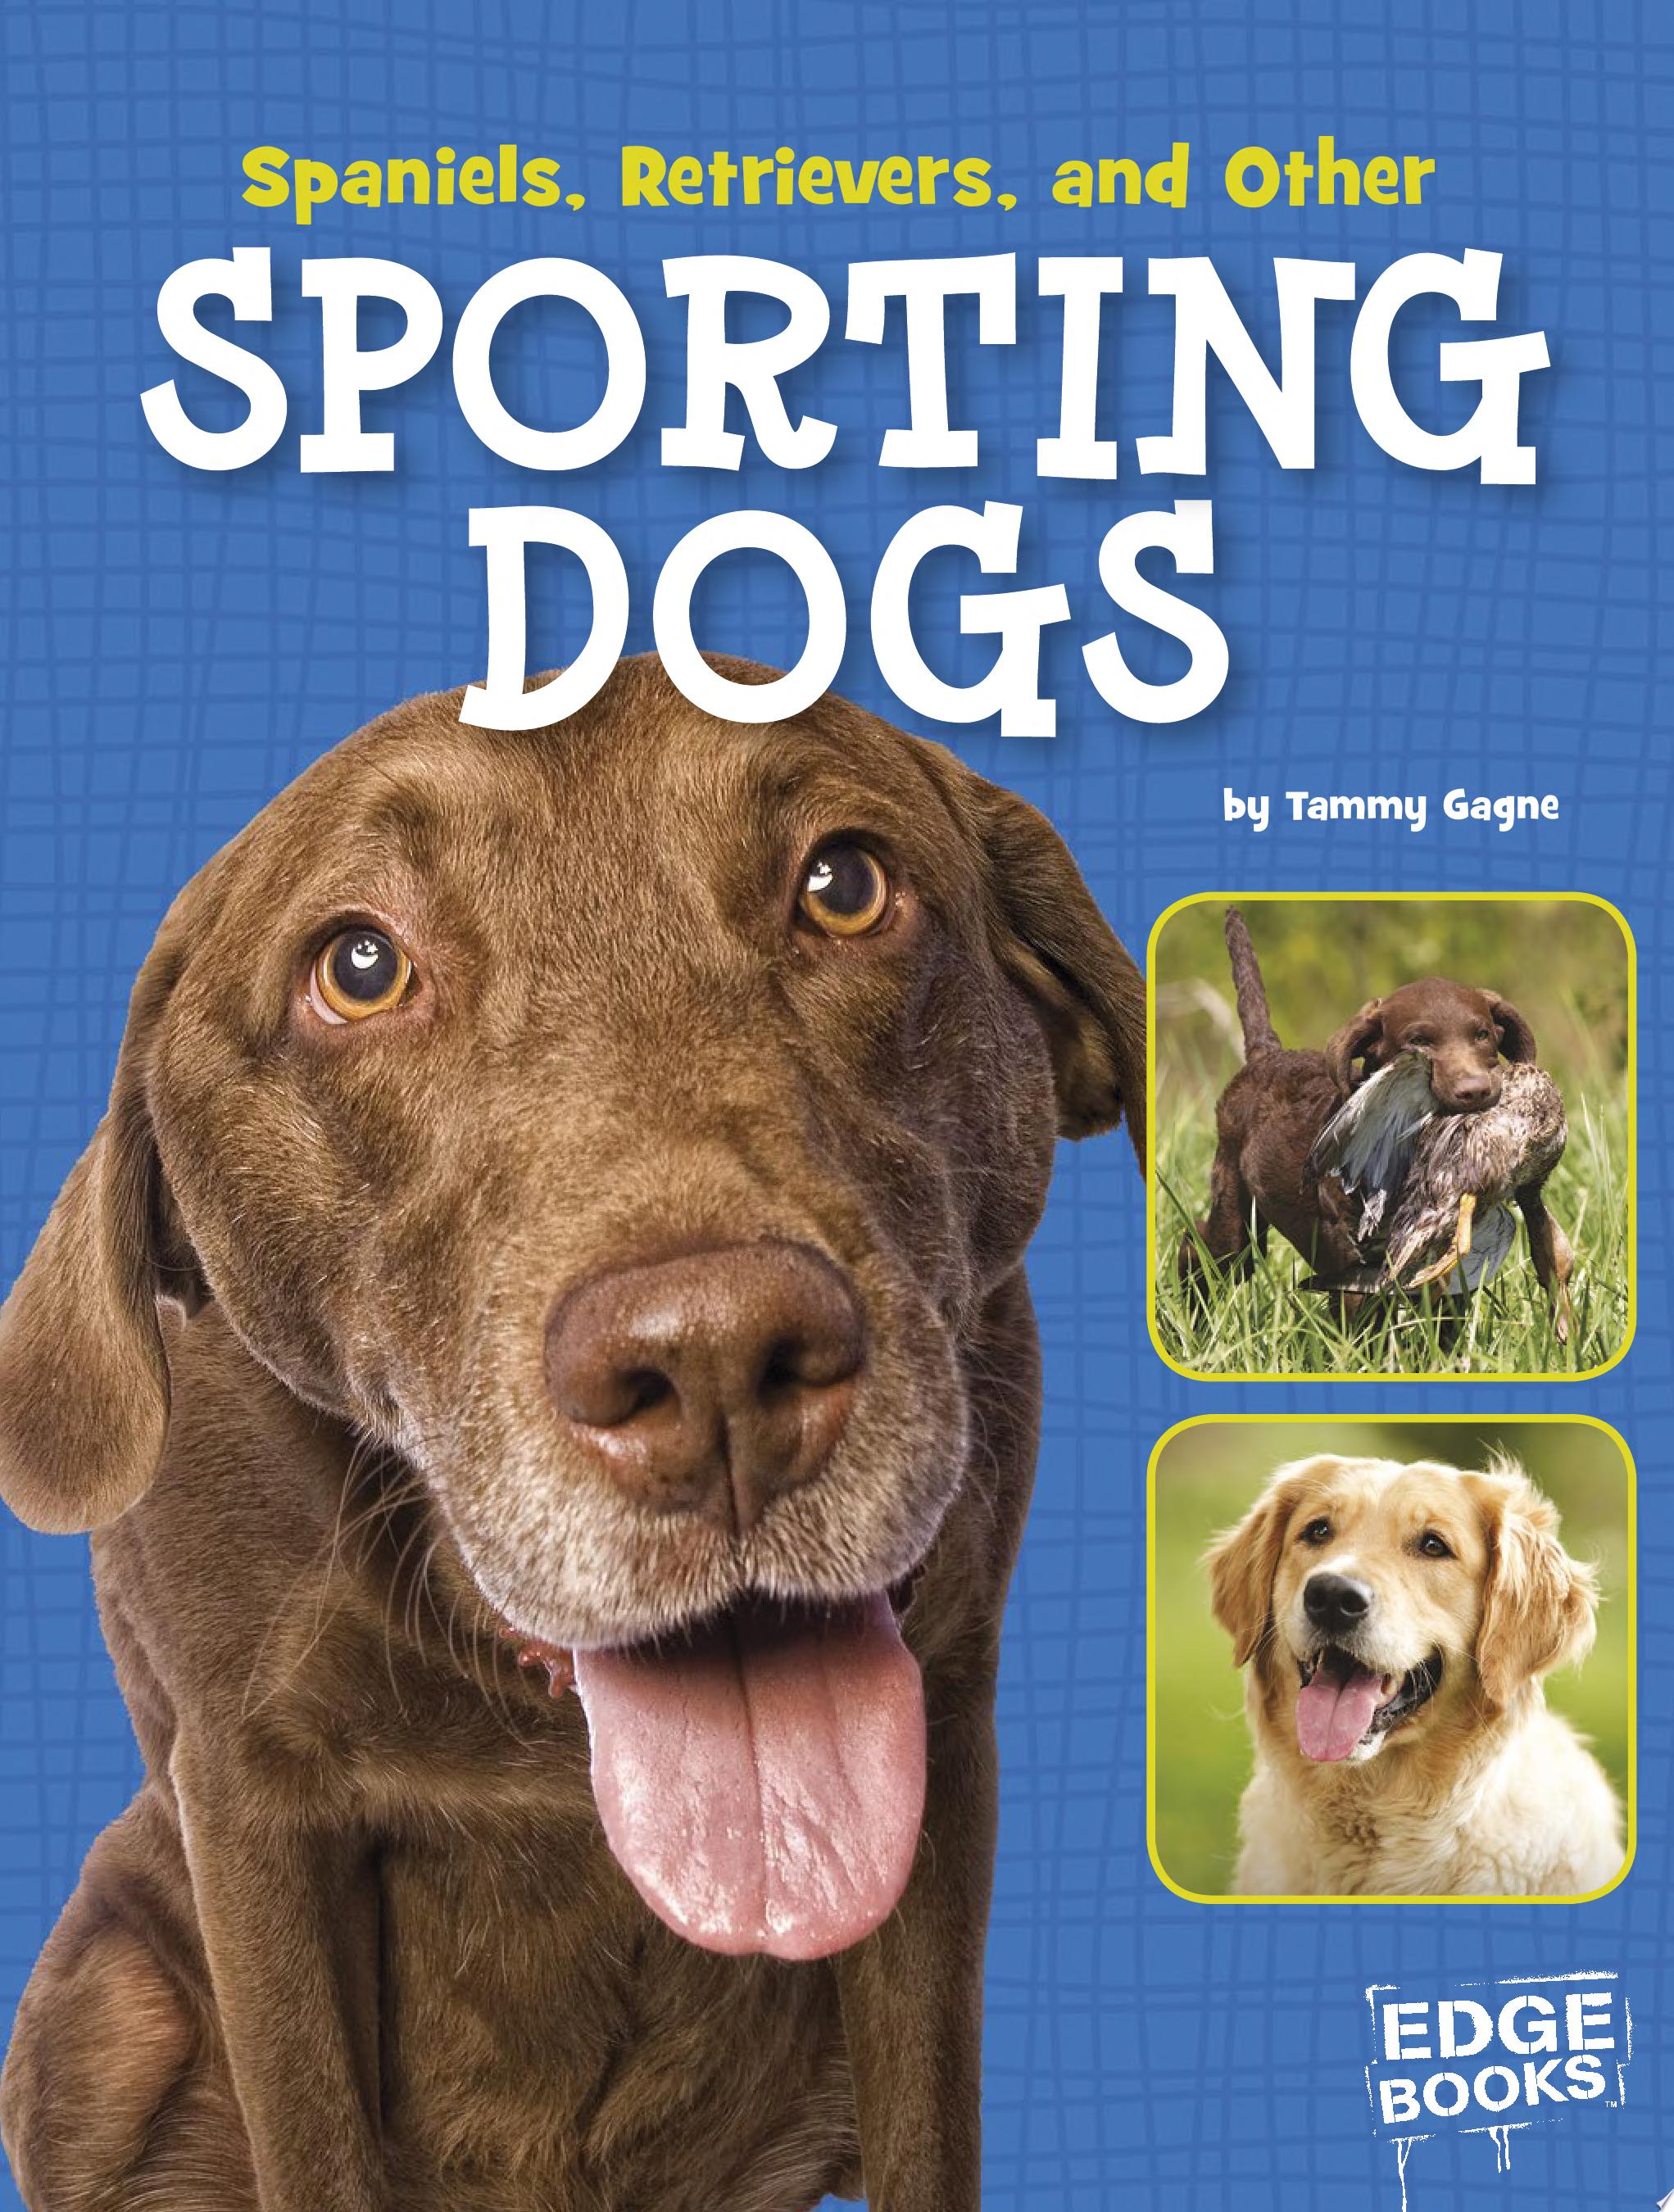 Image for "Spaniels, Retrievers, and Other Sporting Dogs"